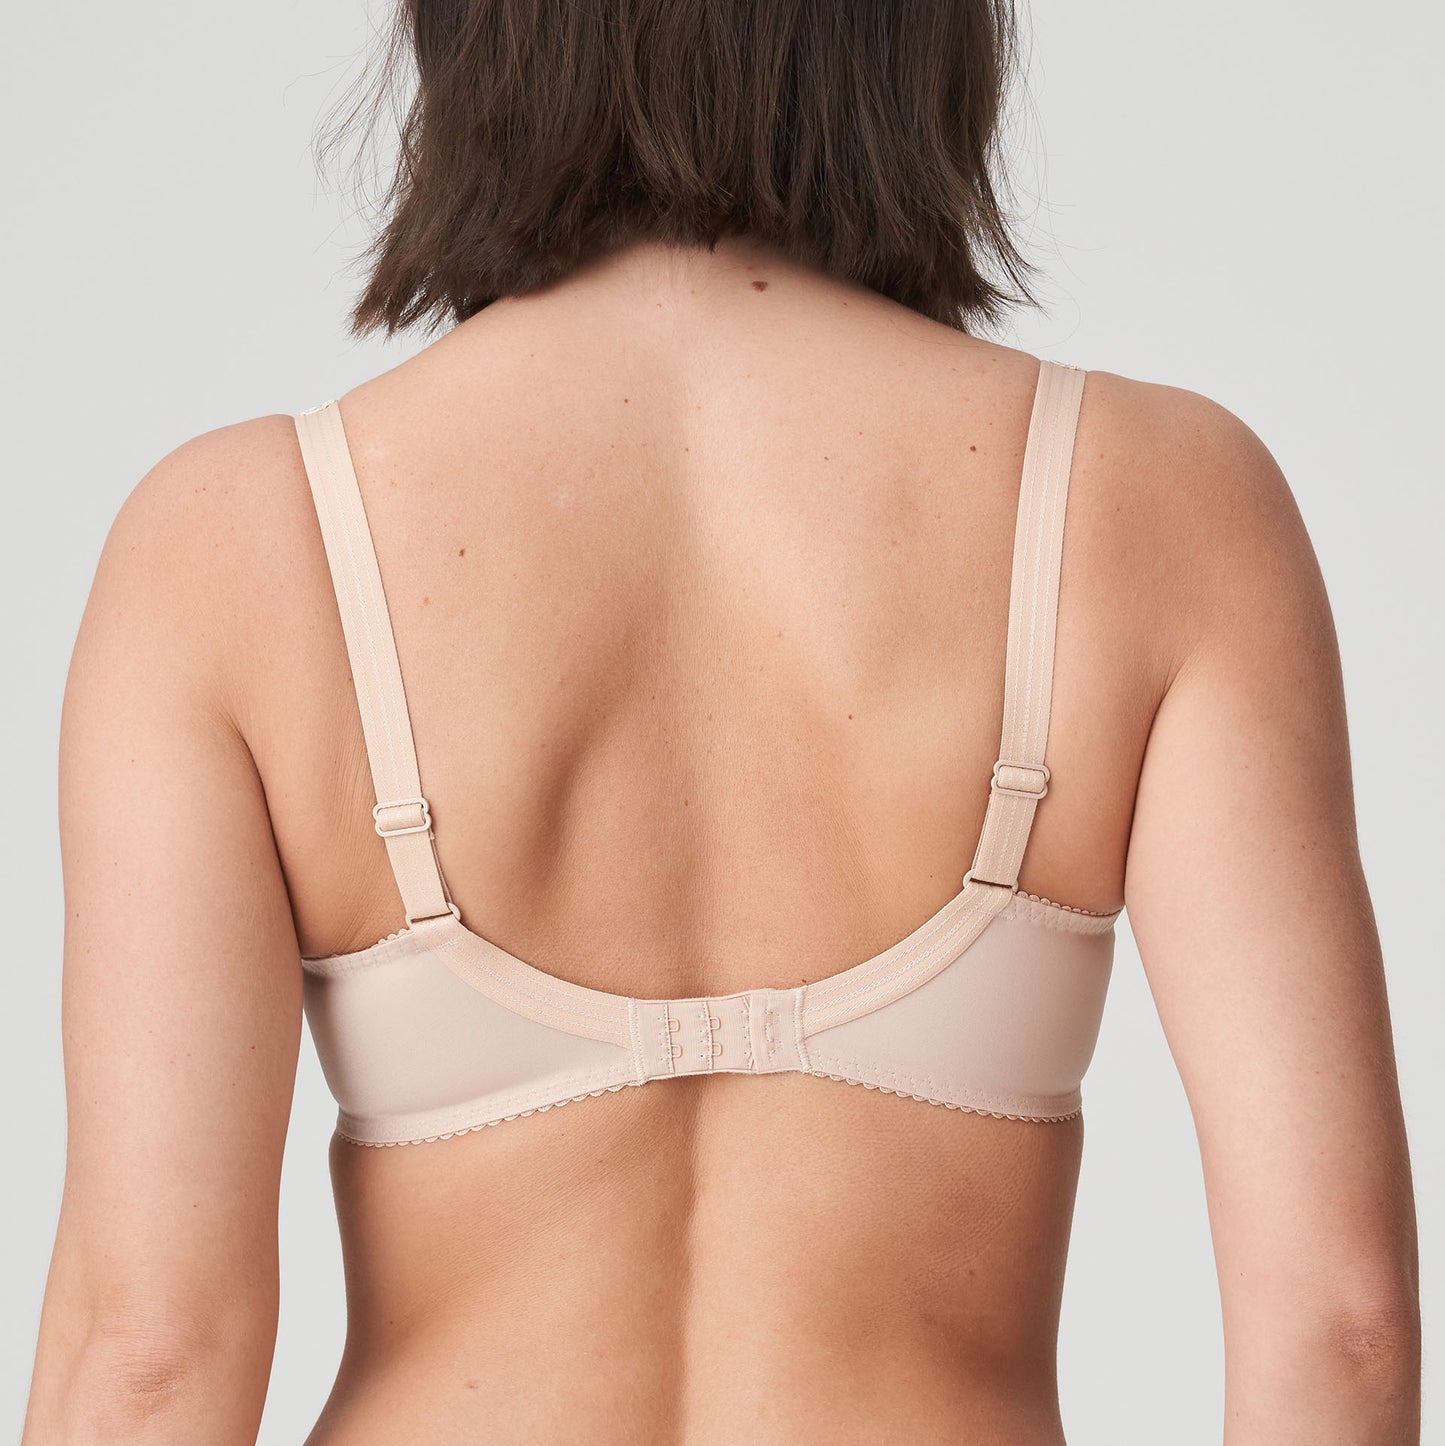 Back view of a woman wearing a supportive full cup underwire bra for large breasts in caffe latte by PrimaDanna.